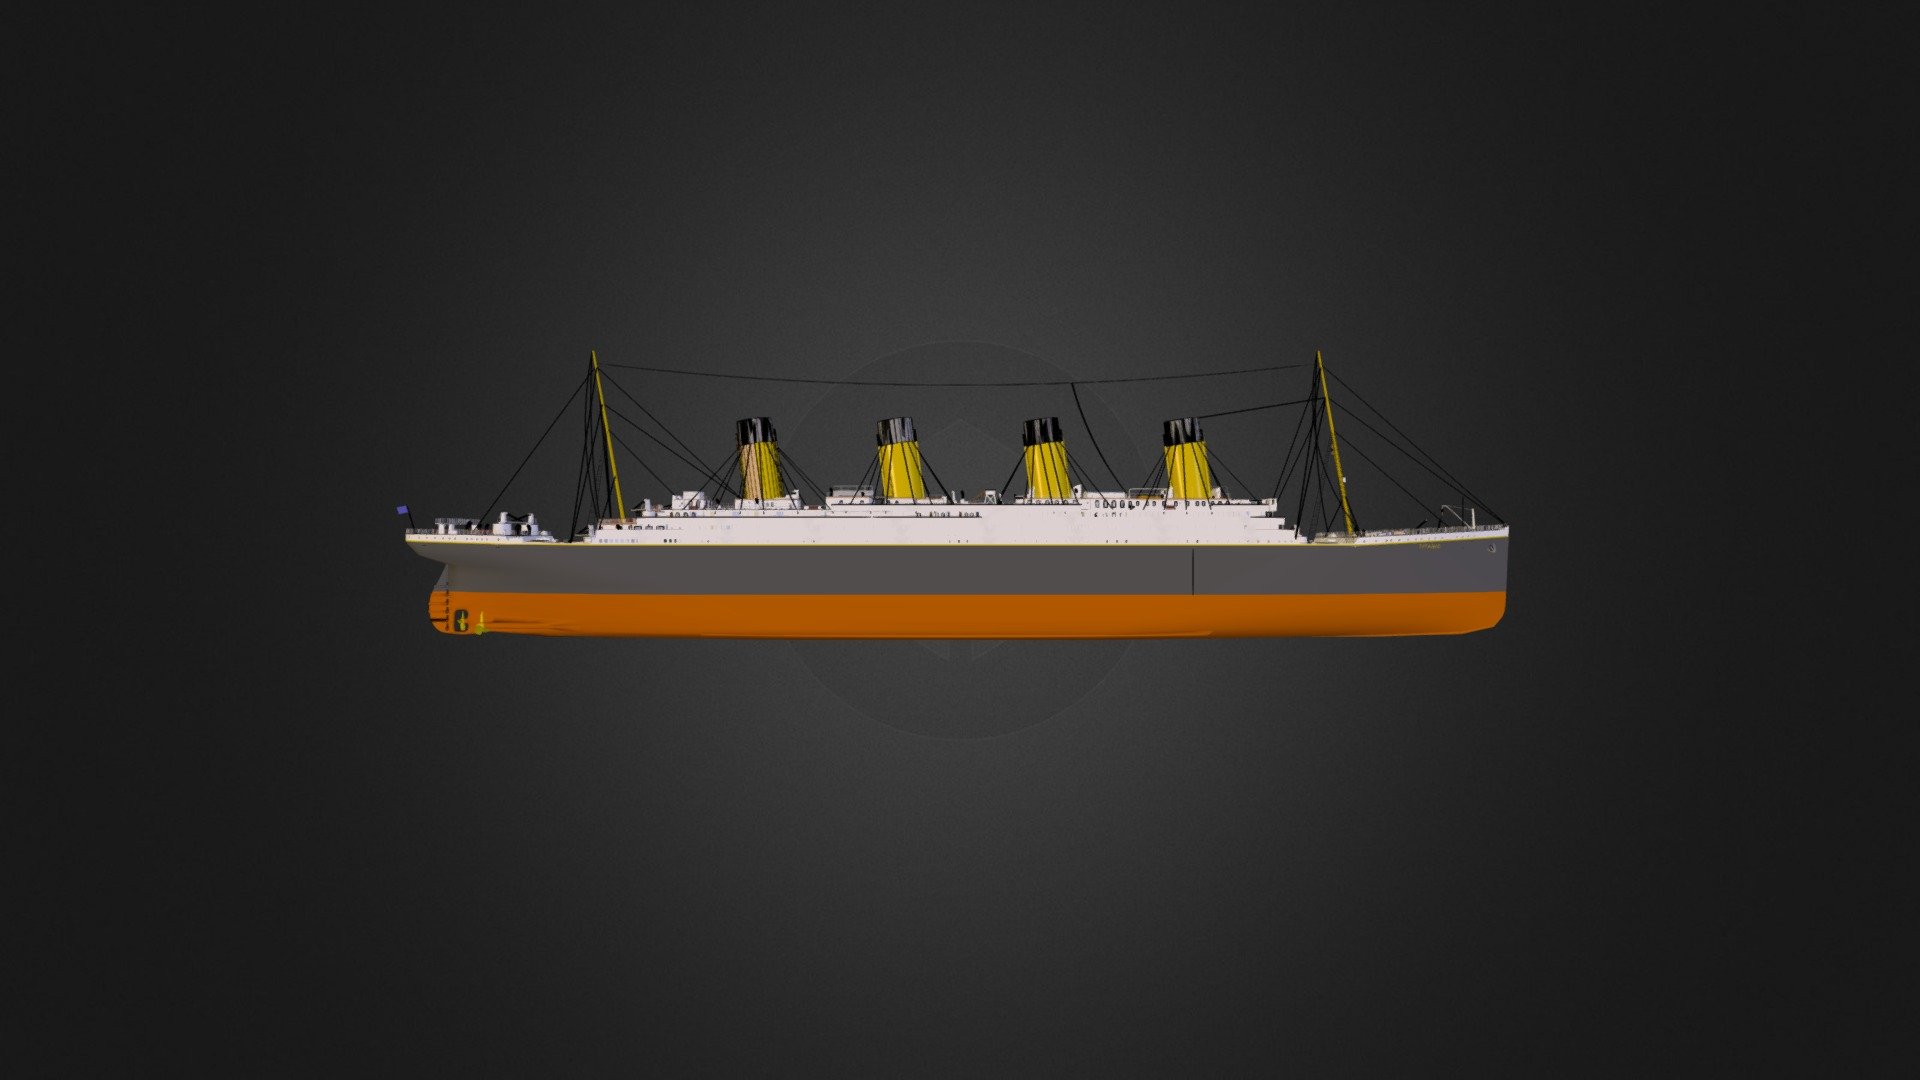 www.ProyectoSanAndres.com (Titanic) - 3D model by proyectosanandres.com ...